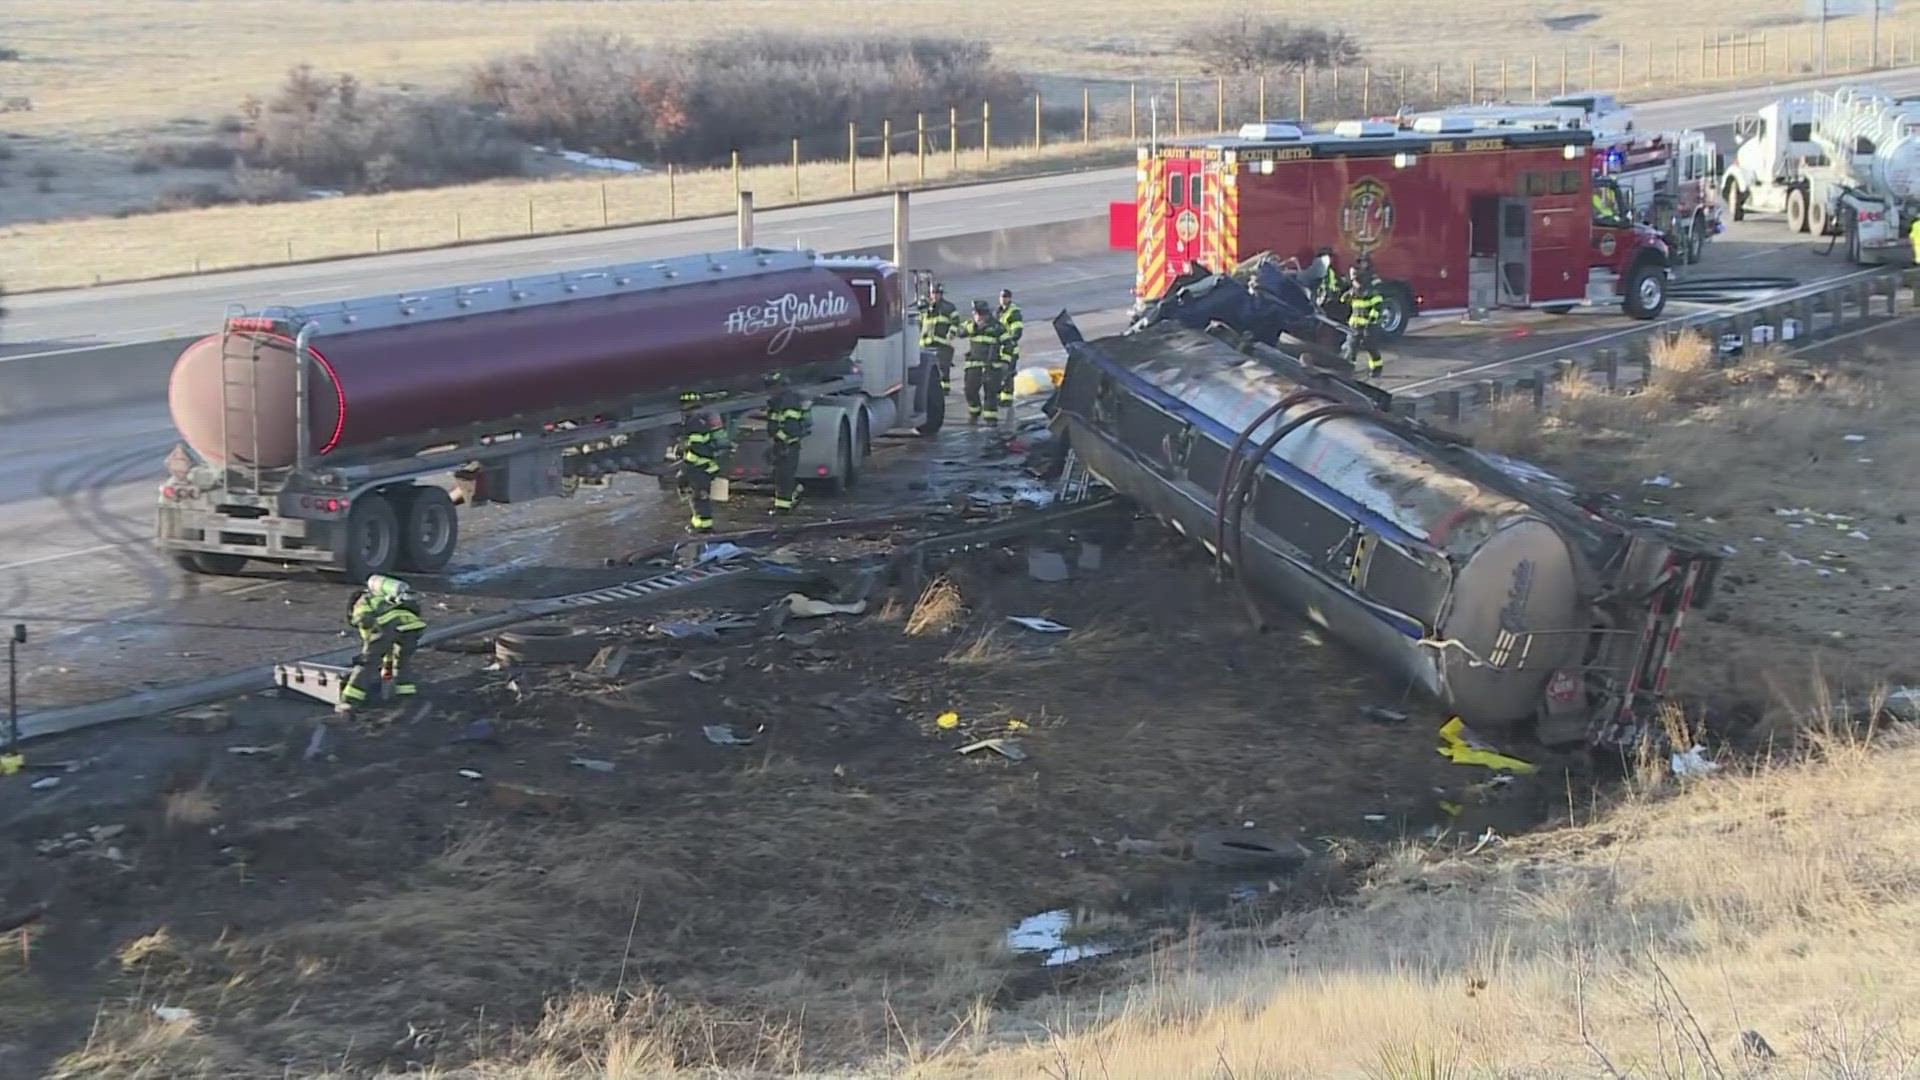 About 2,500 gallons of the truck's 8,000-gallon maximum load spilled into the ditch on the side of Interstate 25 in Castle Pines.